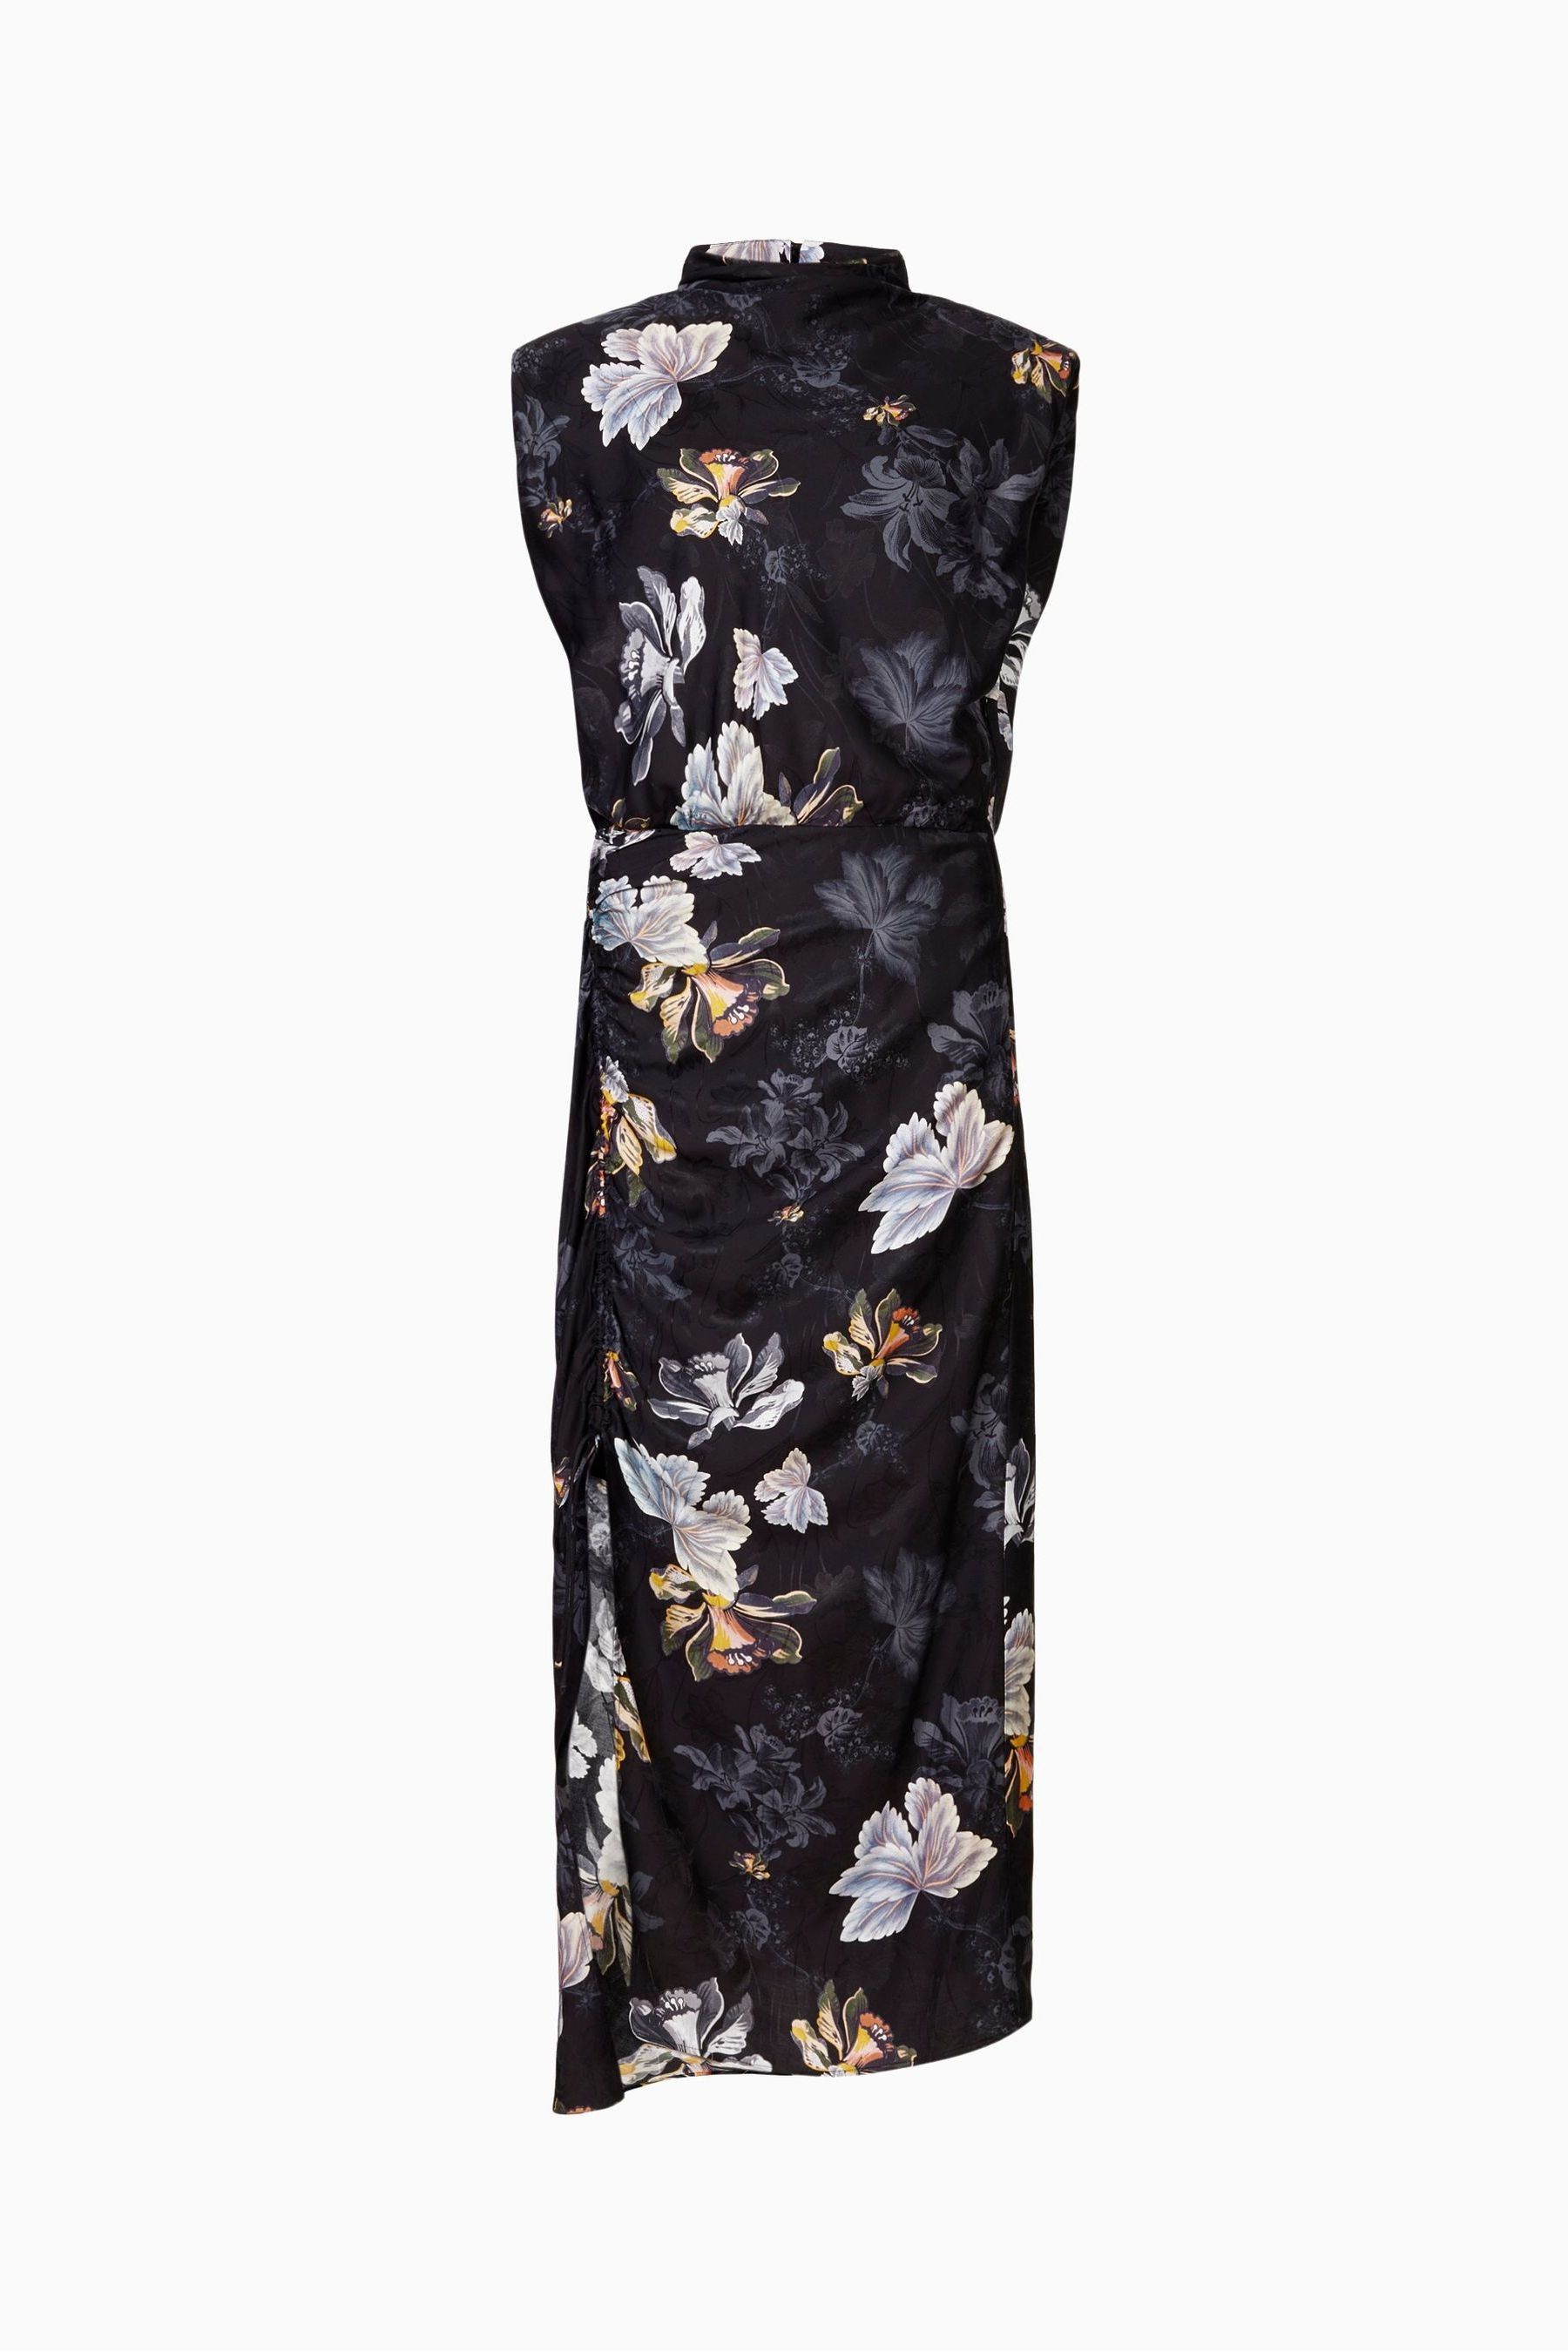 Buy AllSaints Black Isa Lilly Dress from the Next UK online shop